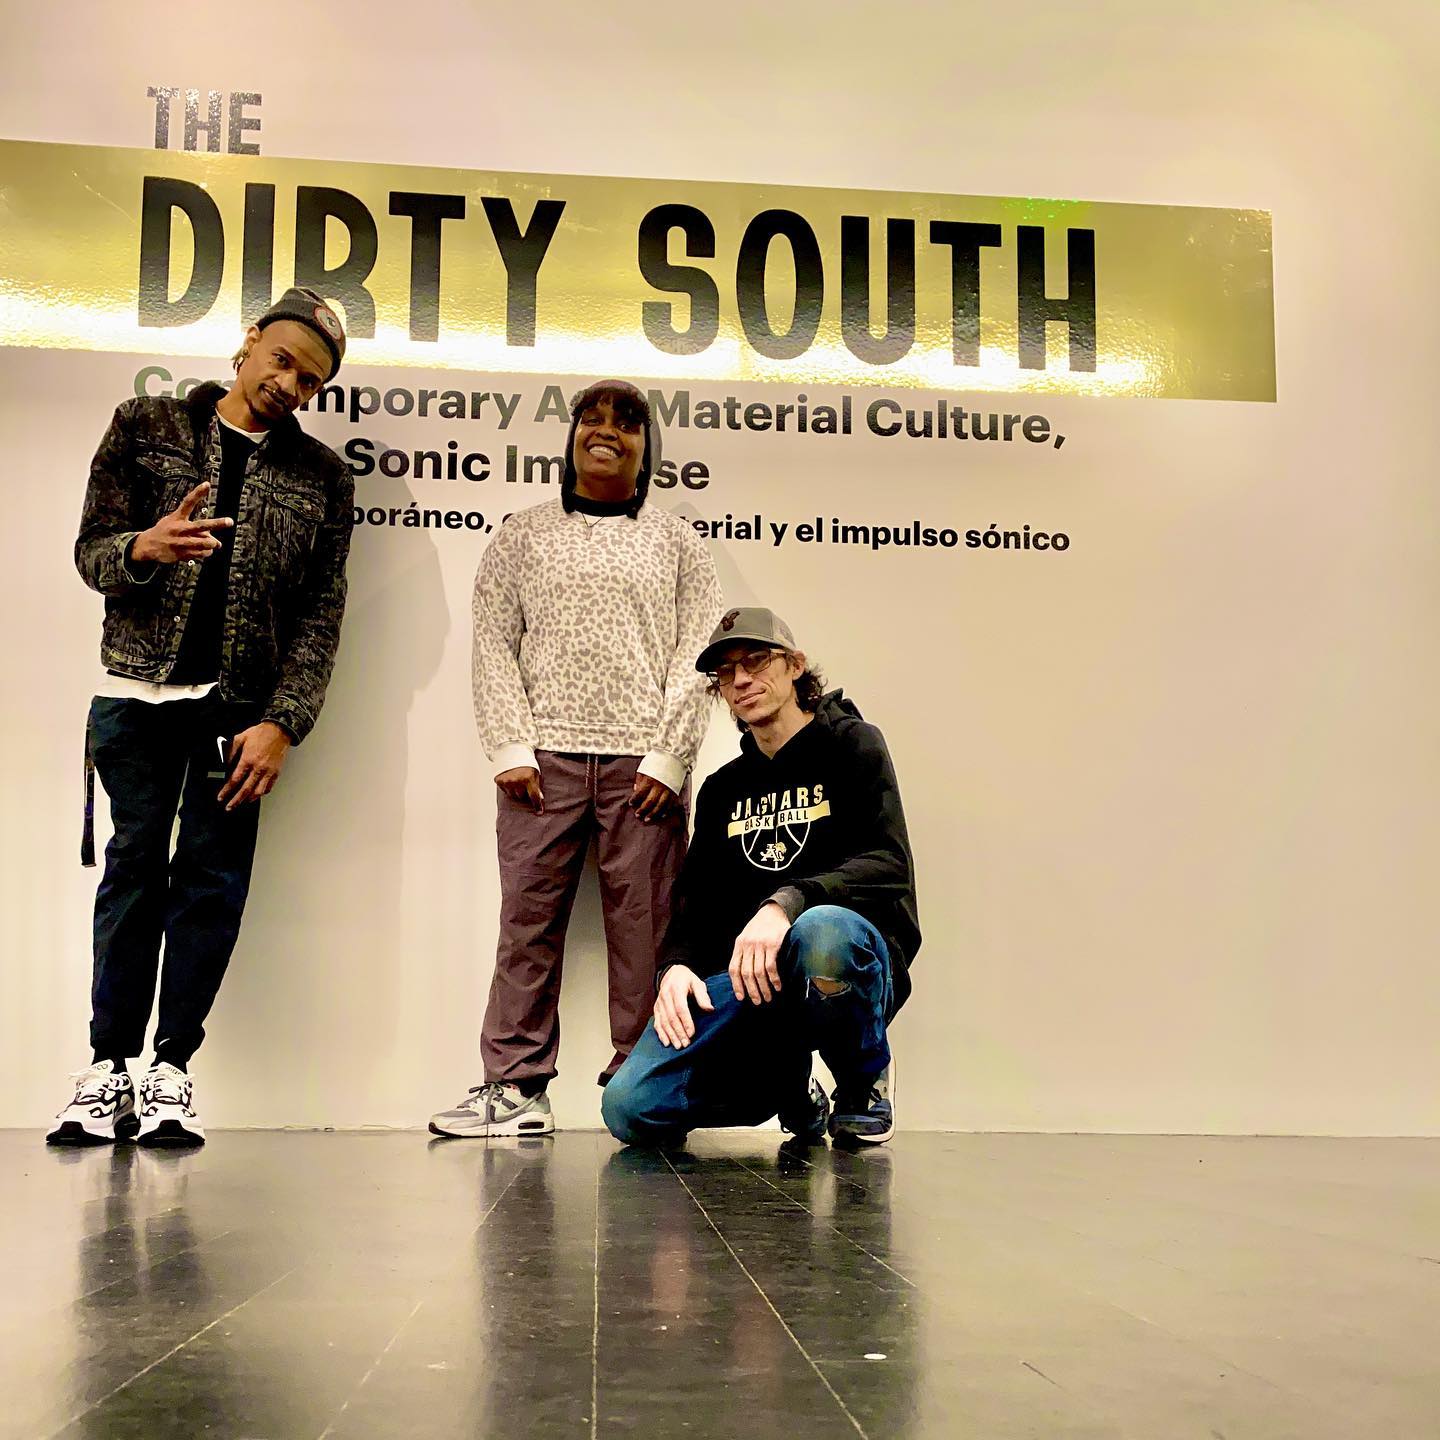 Our very own @chase.no1n, @lkgarland03 and @sunraw_tfs will be performing this weekend in collaboration with Presenting Denver and MCA Denver for The Dirty South. 

The Museum of Contemporary Art Denver and @presentingdenver announce a collaborative dance performance, “From the Bottom to the Top, Dance in The Dirty South,” in conjunction with the current exhibition, The Dirty South: Contemporary Art, Material Culture, and the Sonic Impulse, taking place on January 20 and 21, 2023 at MCA Denver.

The Dirty South will take place at 7PM on Friday, January 20, 2023 and at 2PM on Saturday, January 21, 2023 

Featured artist throughout the museum in response to the art on view and will create movement that brings the artworks to life.

To check out The Dirty South Exhibit and watch the dance performances.

MCA Denver’s Fries Building, located at 1485 Delgany St. downtown. 

 link in bio to purchase tickets!

#schoolofbreaking @mca_denver #presentingdenver #dirtysouth #HipHop #streetdance #bboy #bgirl #culture #performance #showcase #artshow #dancers #performers #entertainment